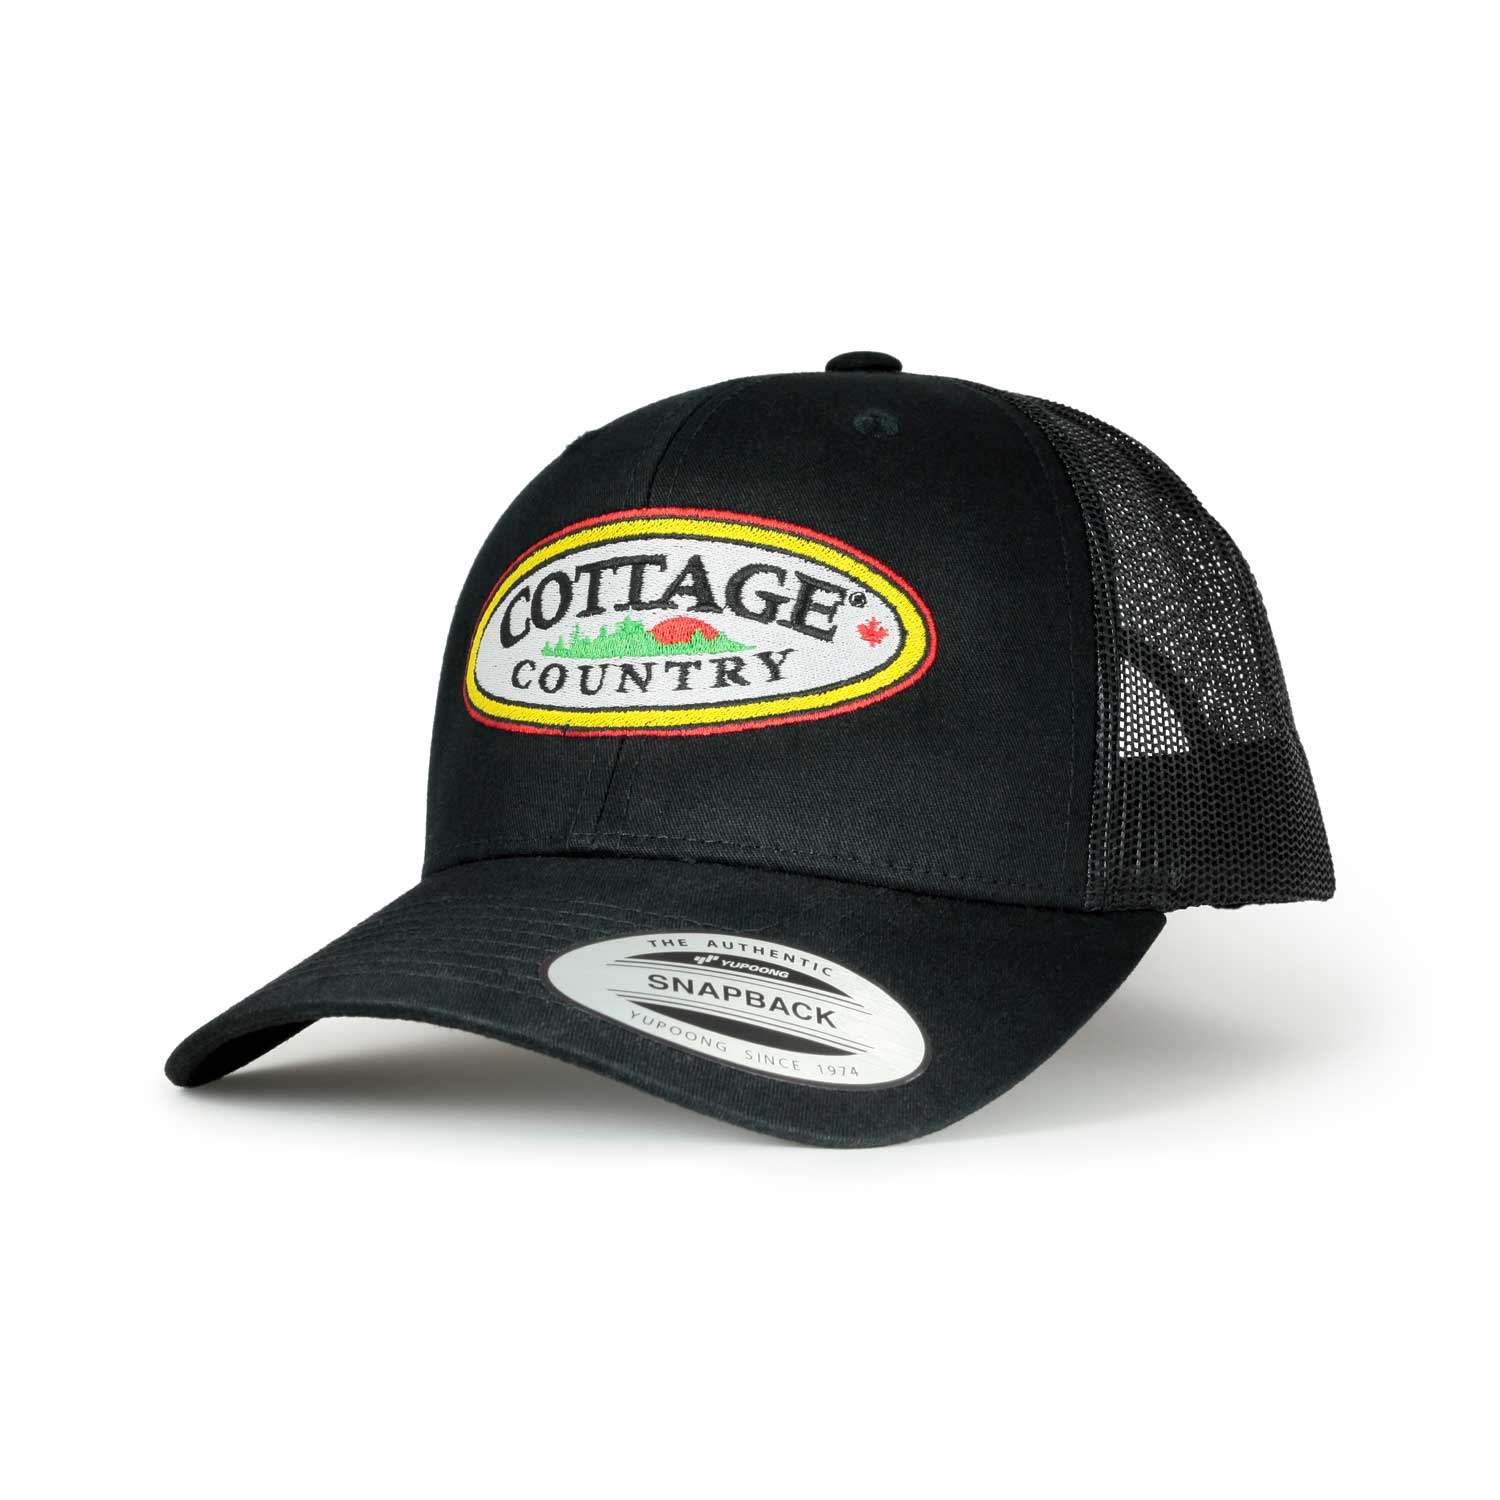 https://cottagecountrycandies.com/wp-content/uploads/2023/01/Cottage-Country_Hat_Side-Angle_v1.jpg